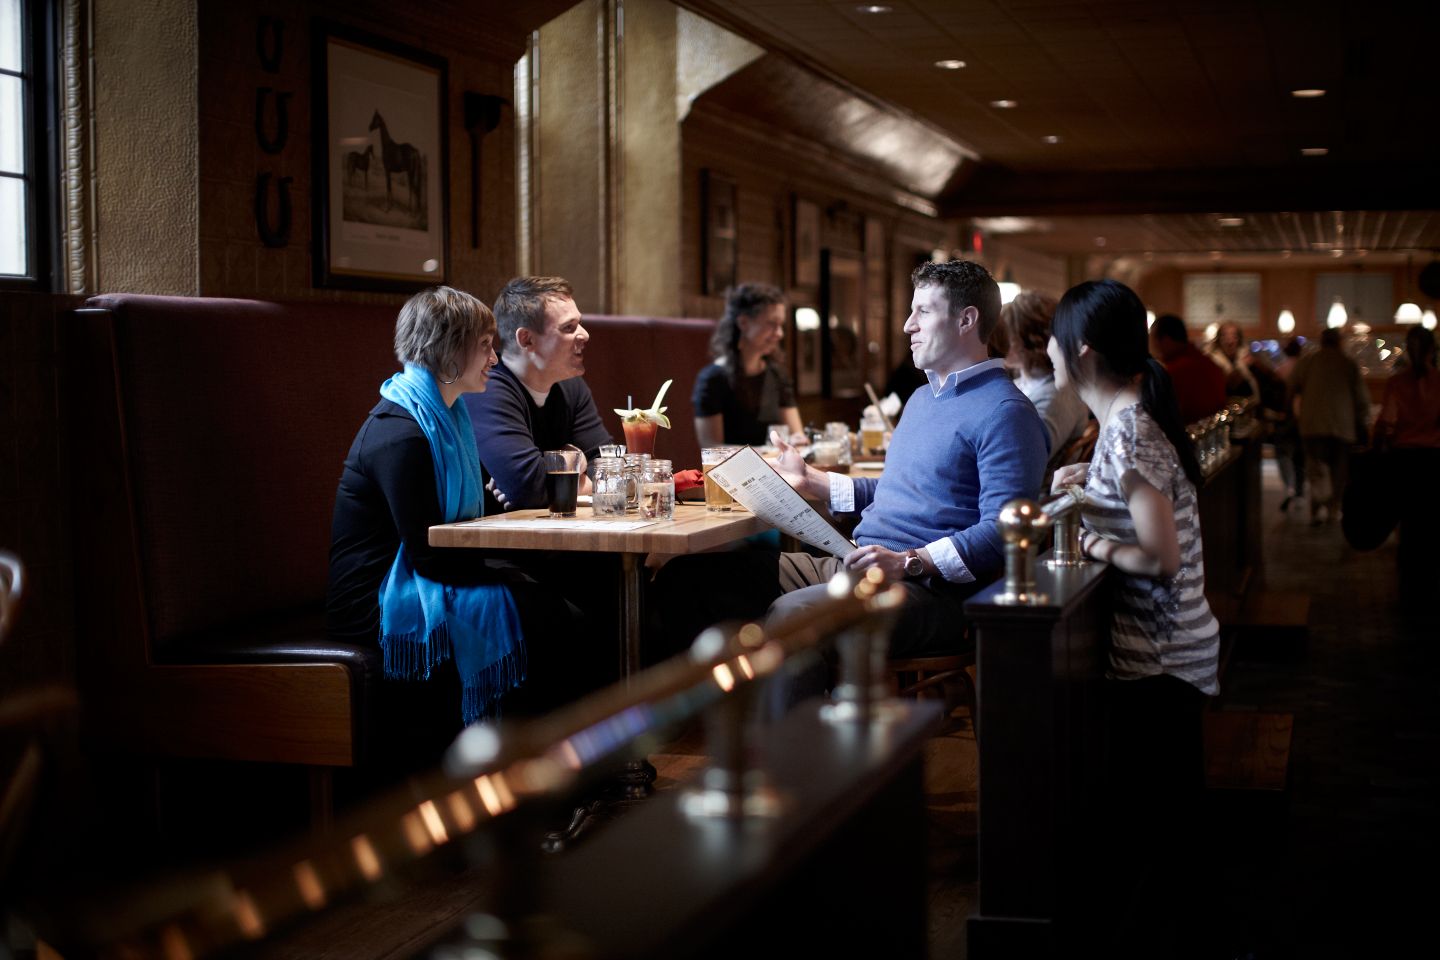 three people sitting at a restaurant table with one person standing, all of them talking